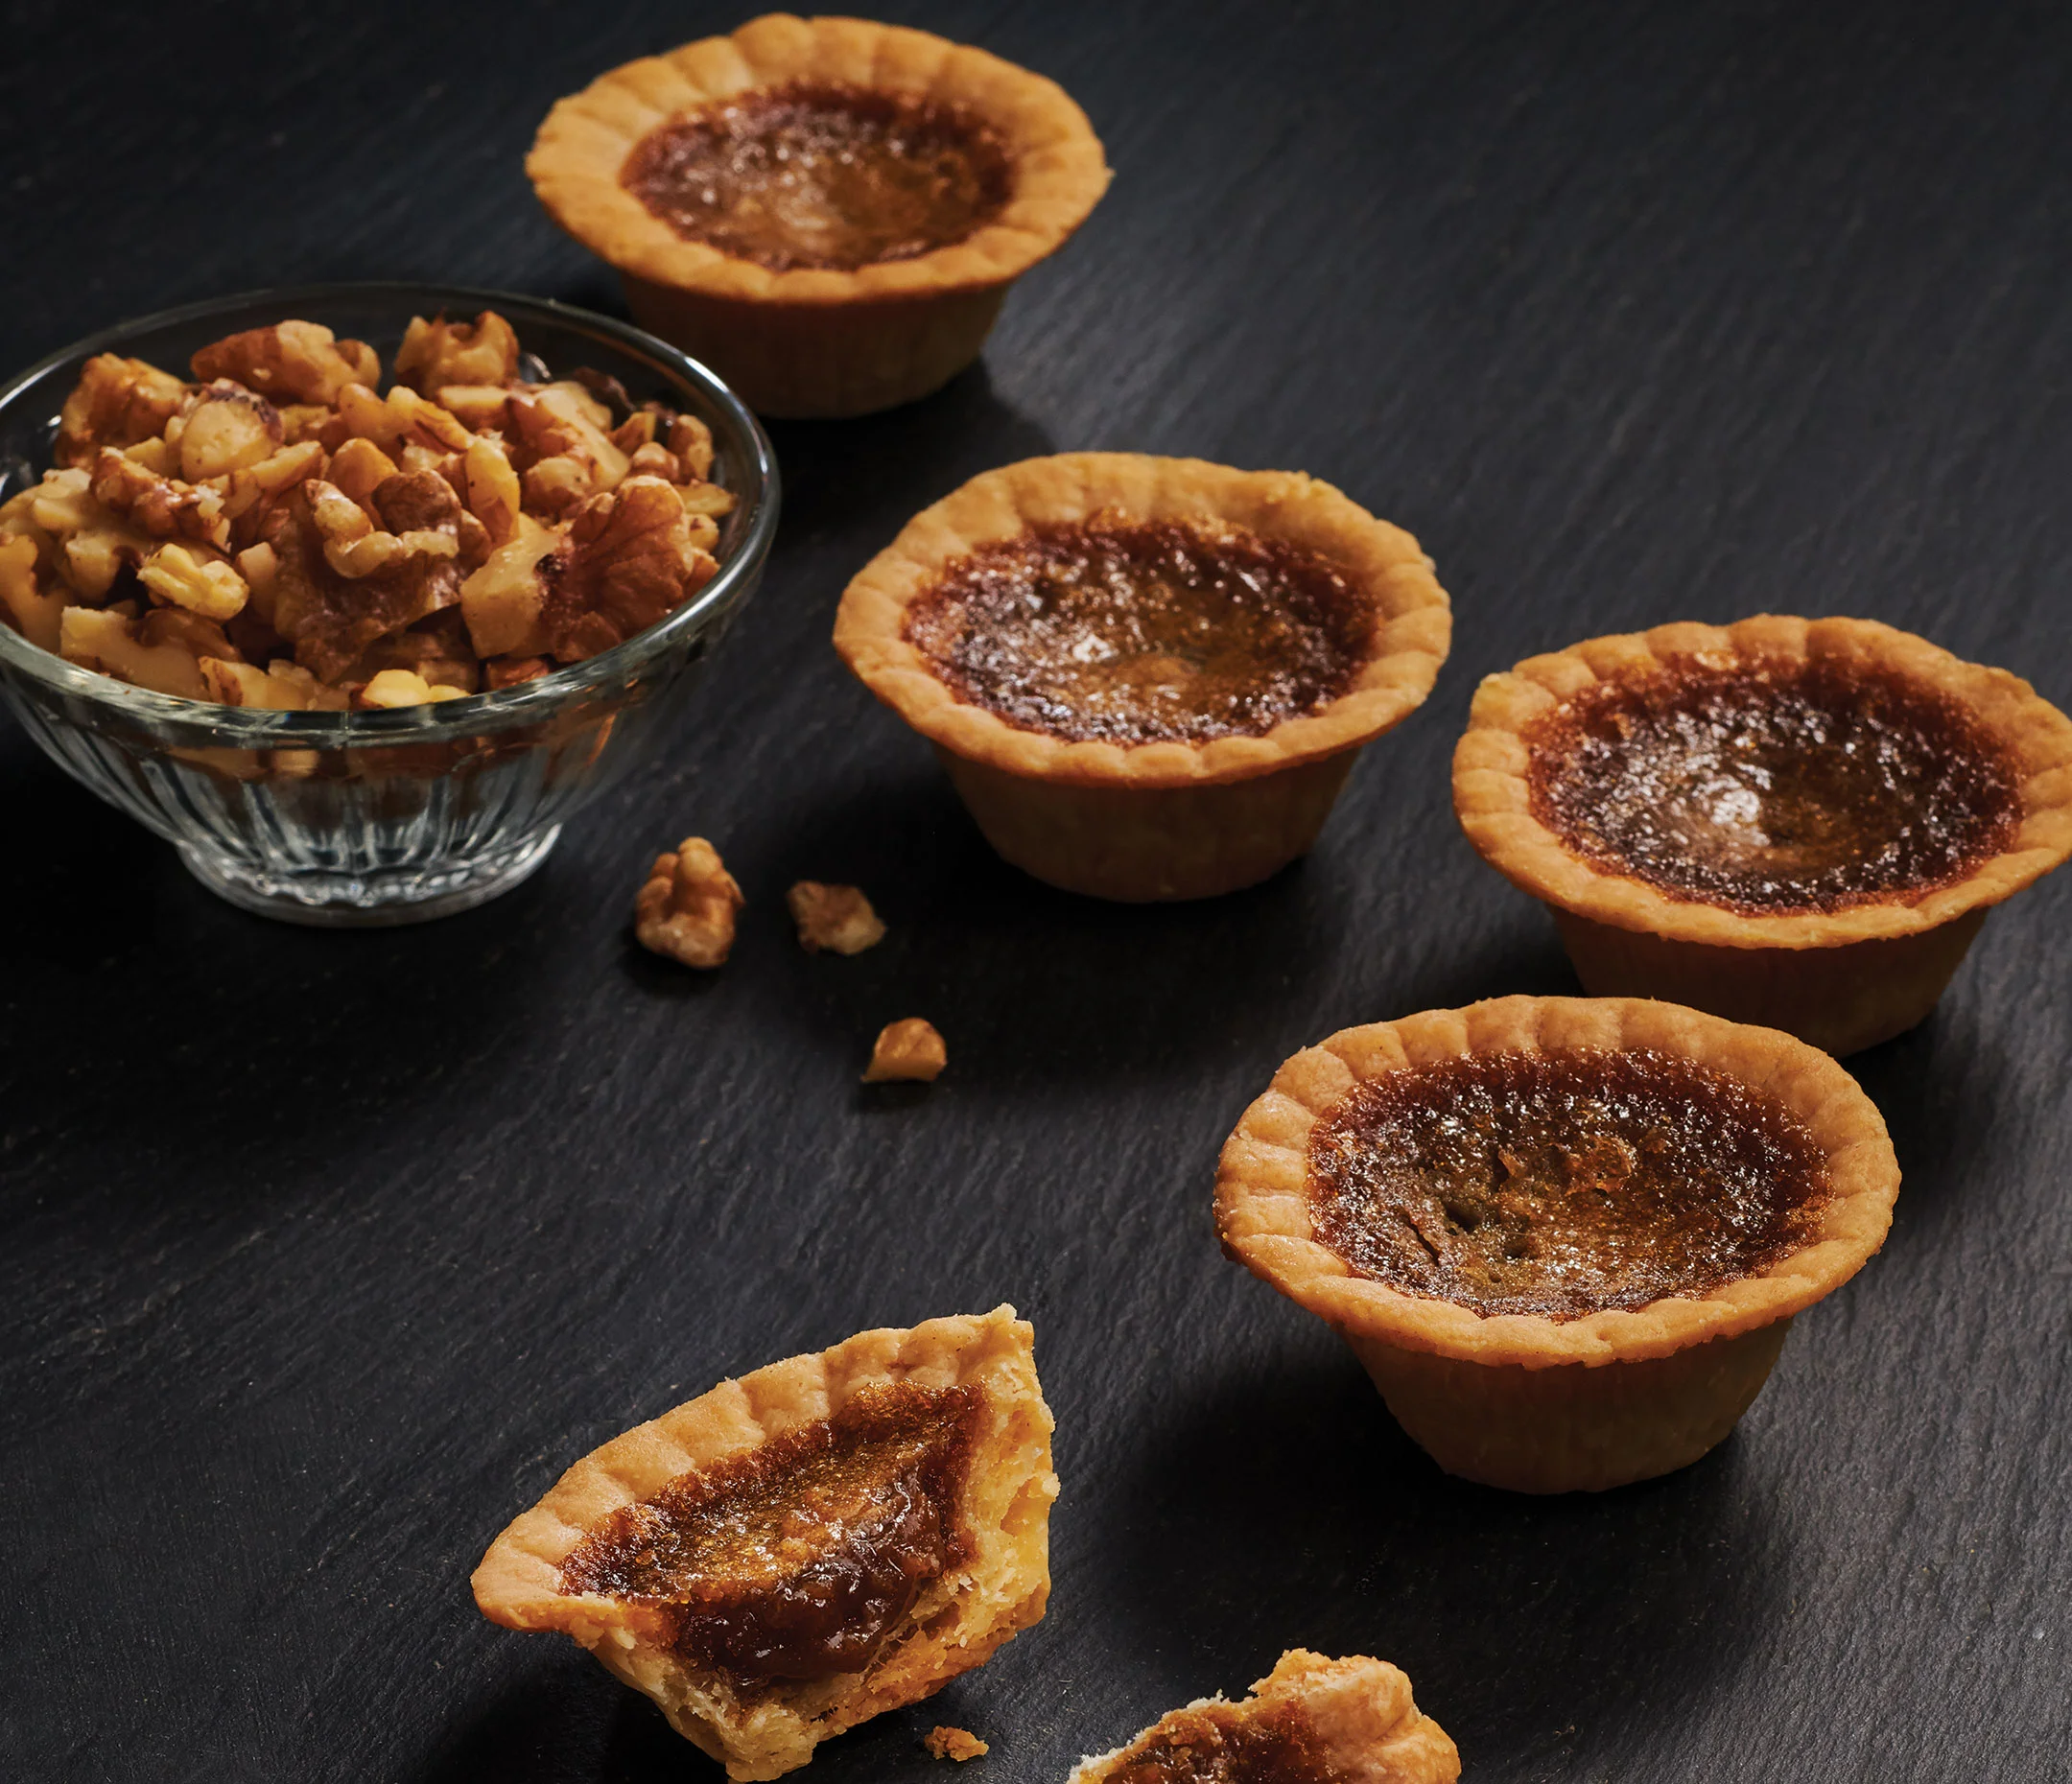 True North Butter Tarts (Pack of 2)